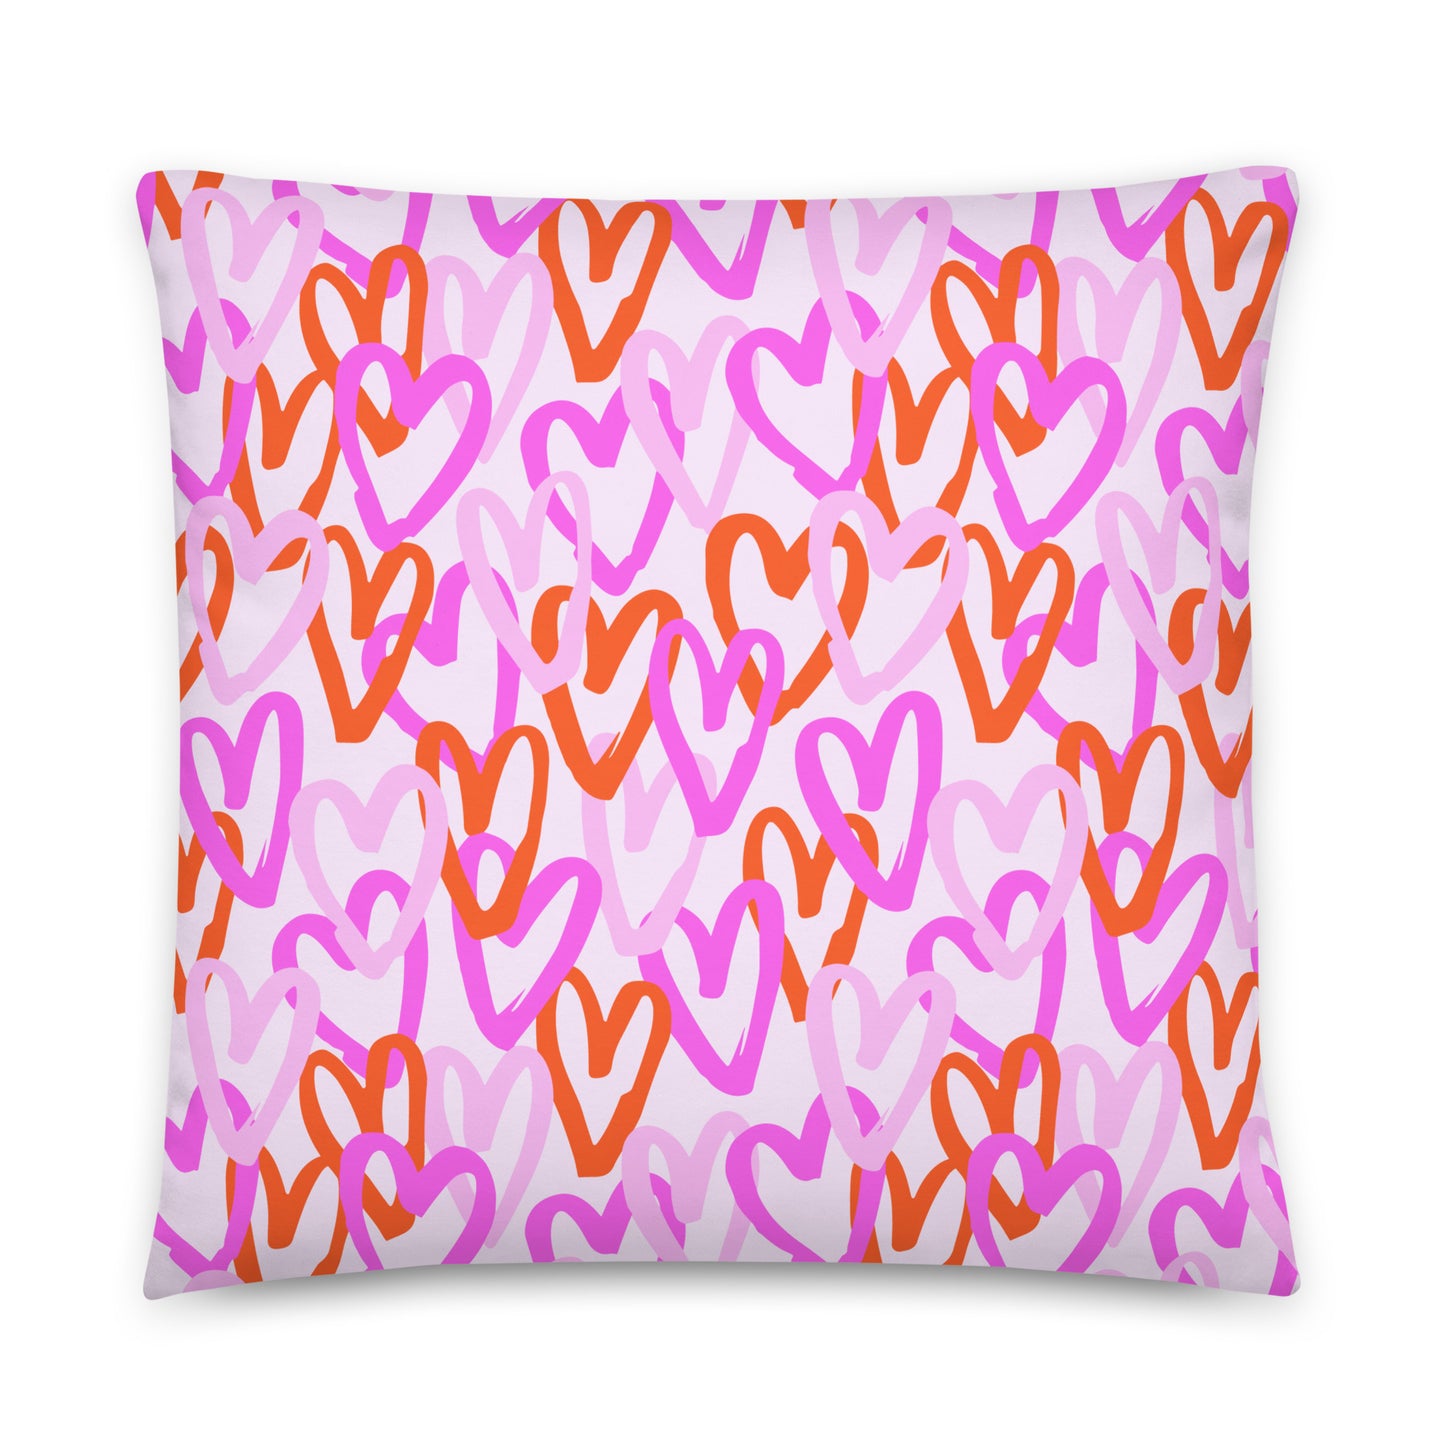 Overlapping Hearts Pillow